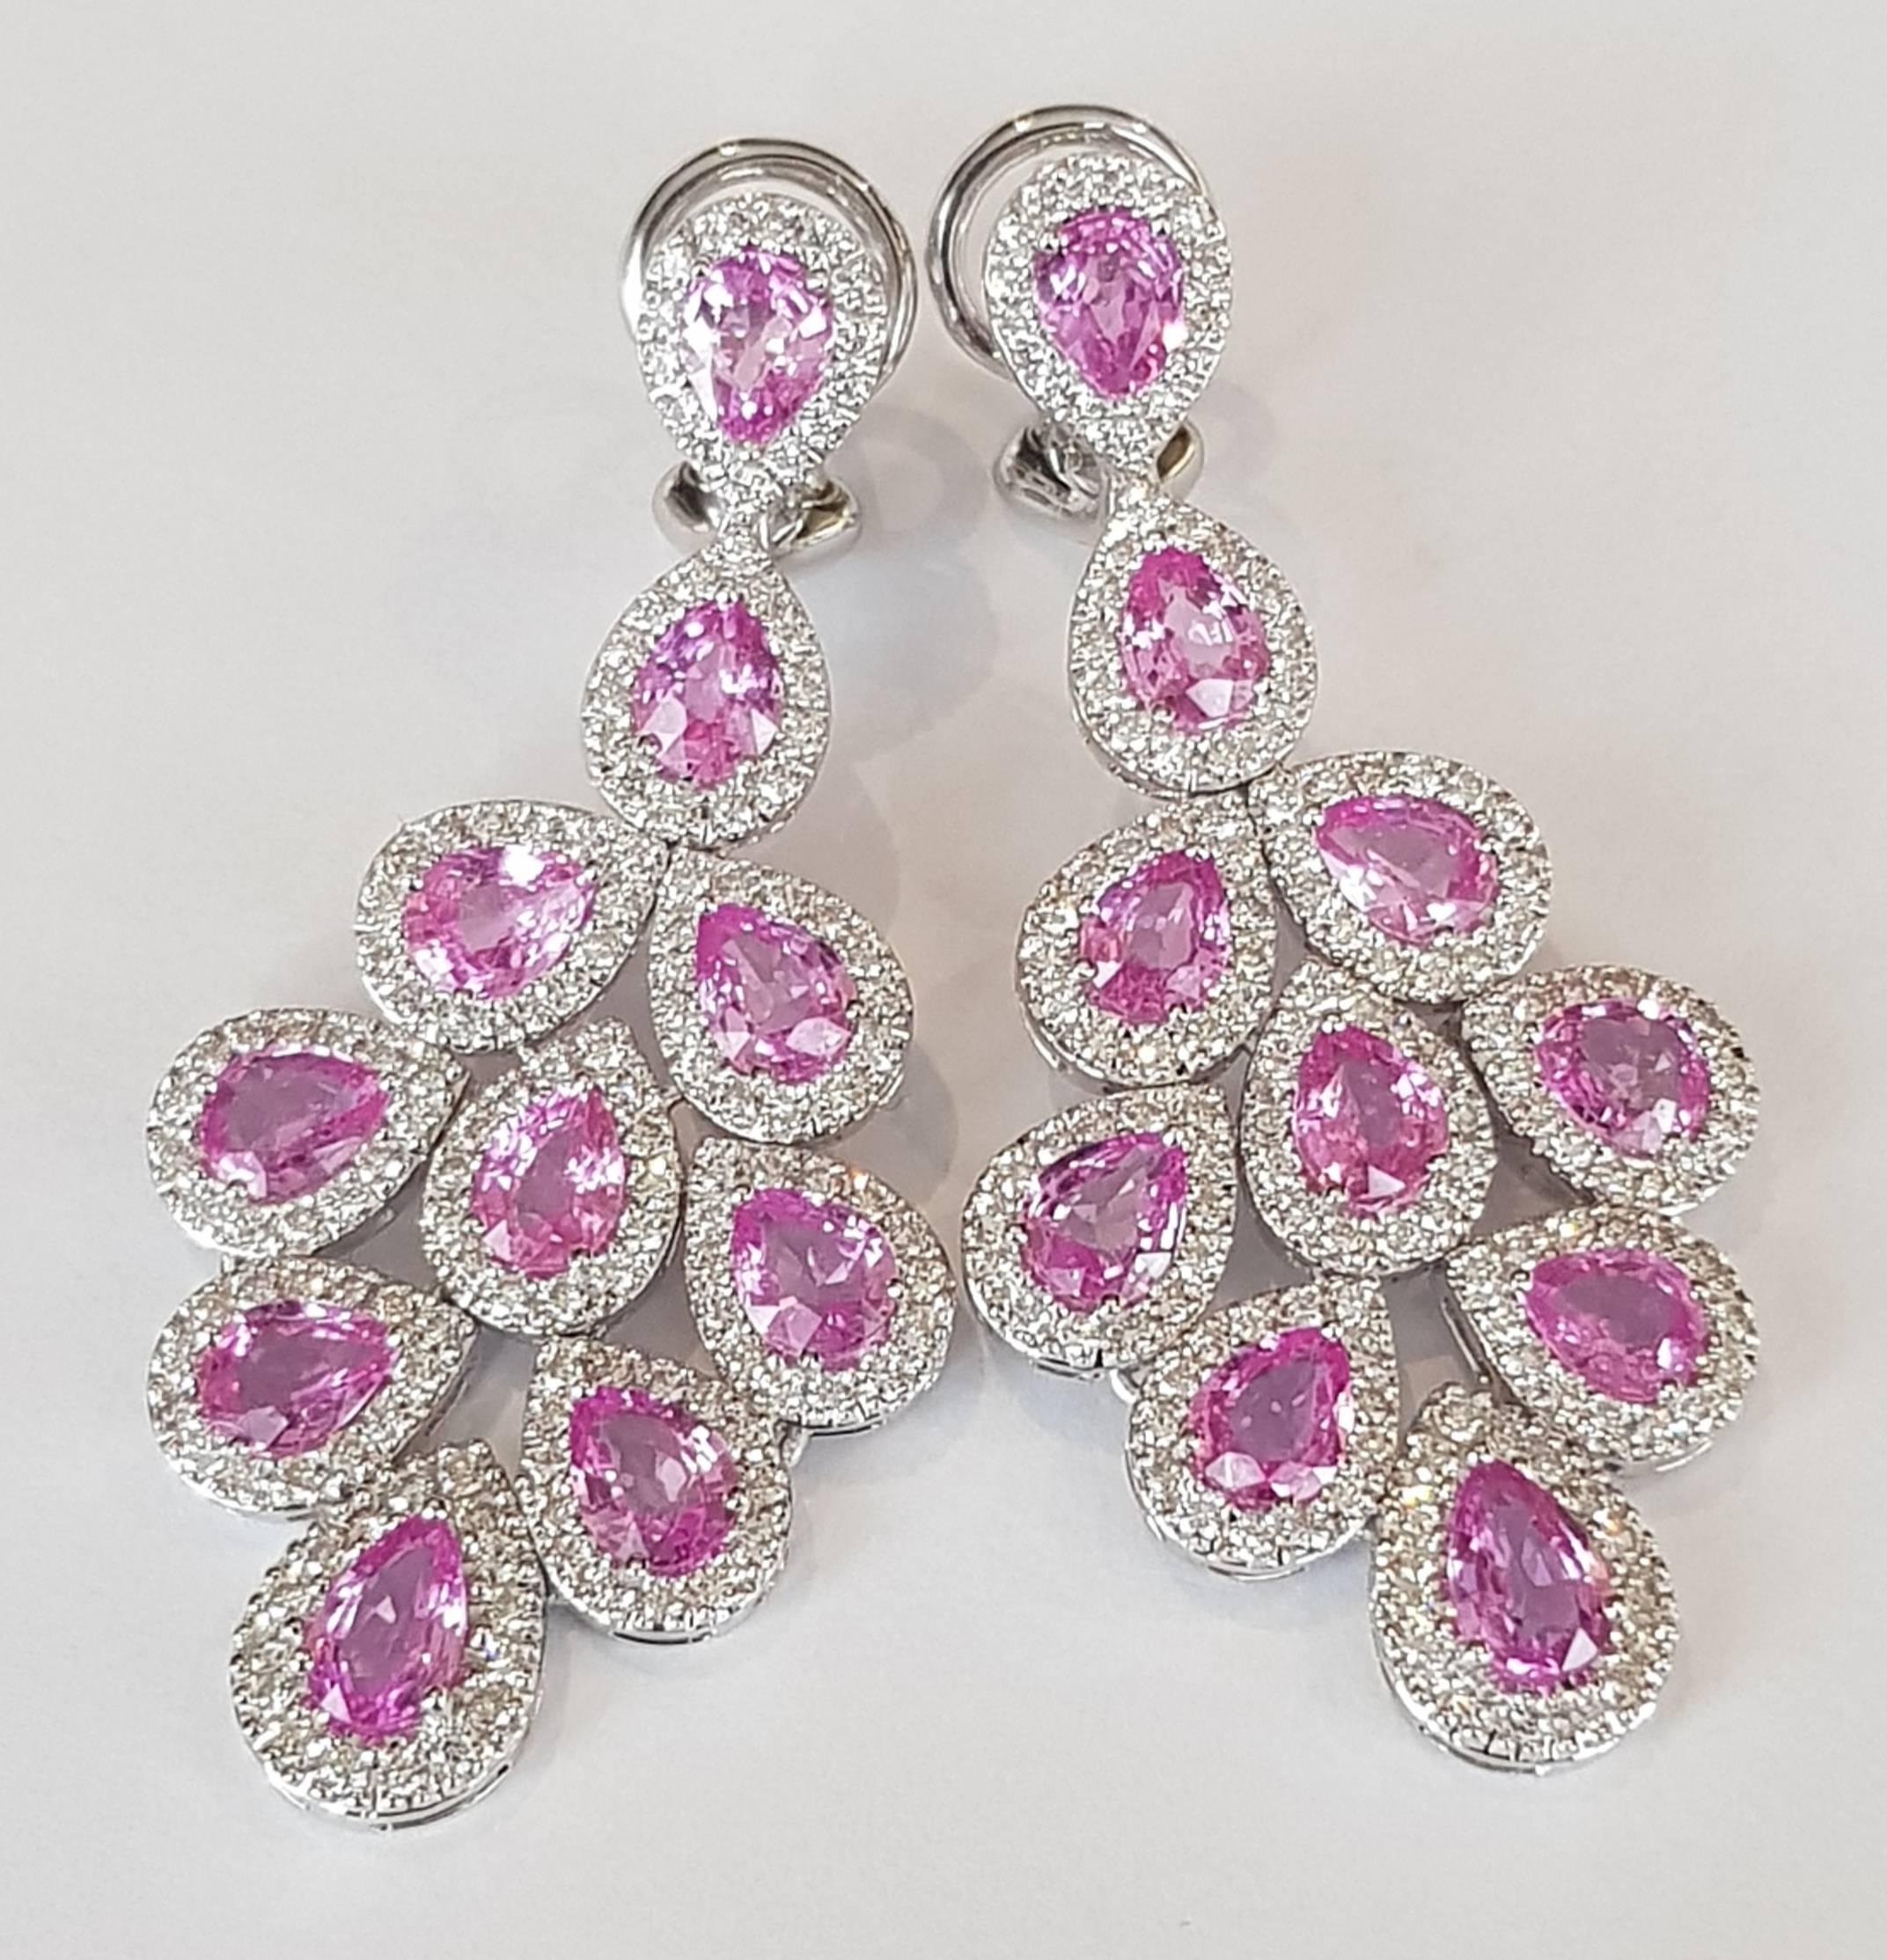 Pink Sapphire and Diamond Dangle Earrings
284 diamonds 2.31 ct
20 pink sapphires 7.56 ct
18 karat white gold 
come with clips and studs/ either can be removed free of charge